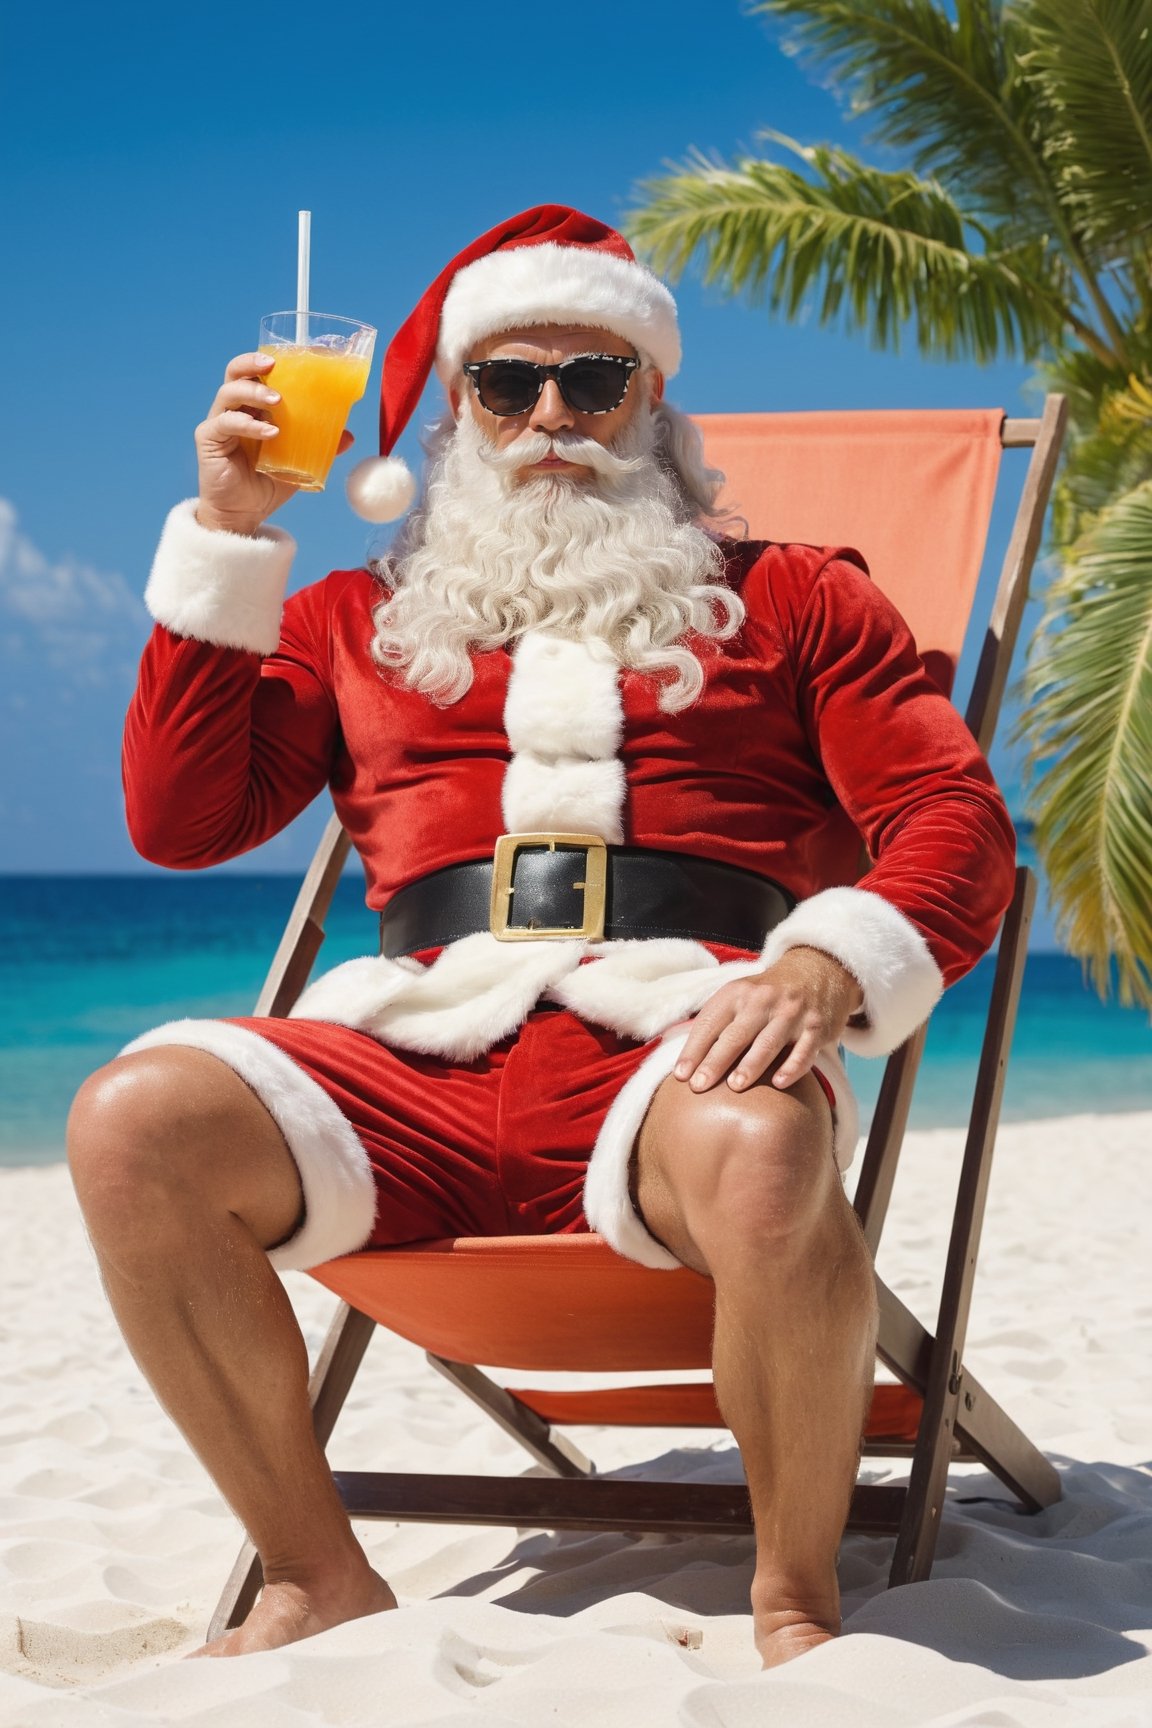 Santa Claus costume, Santa Claus in sunglasses, lying on a deckchair on the beach and drinking a tropical drink, tropical island, resort, strong arms, sleeveless, muscular body, savage, Merry Christmas, stylish